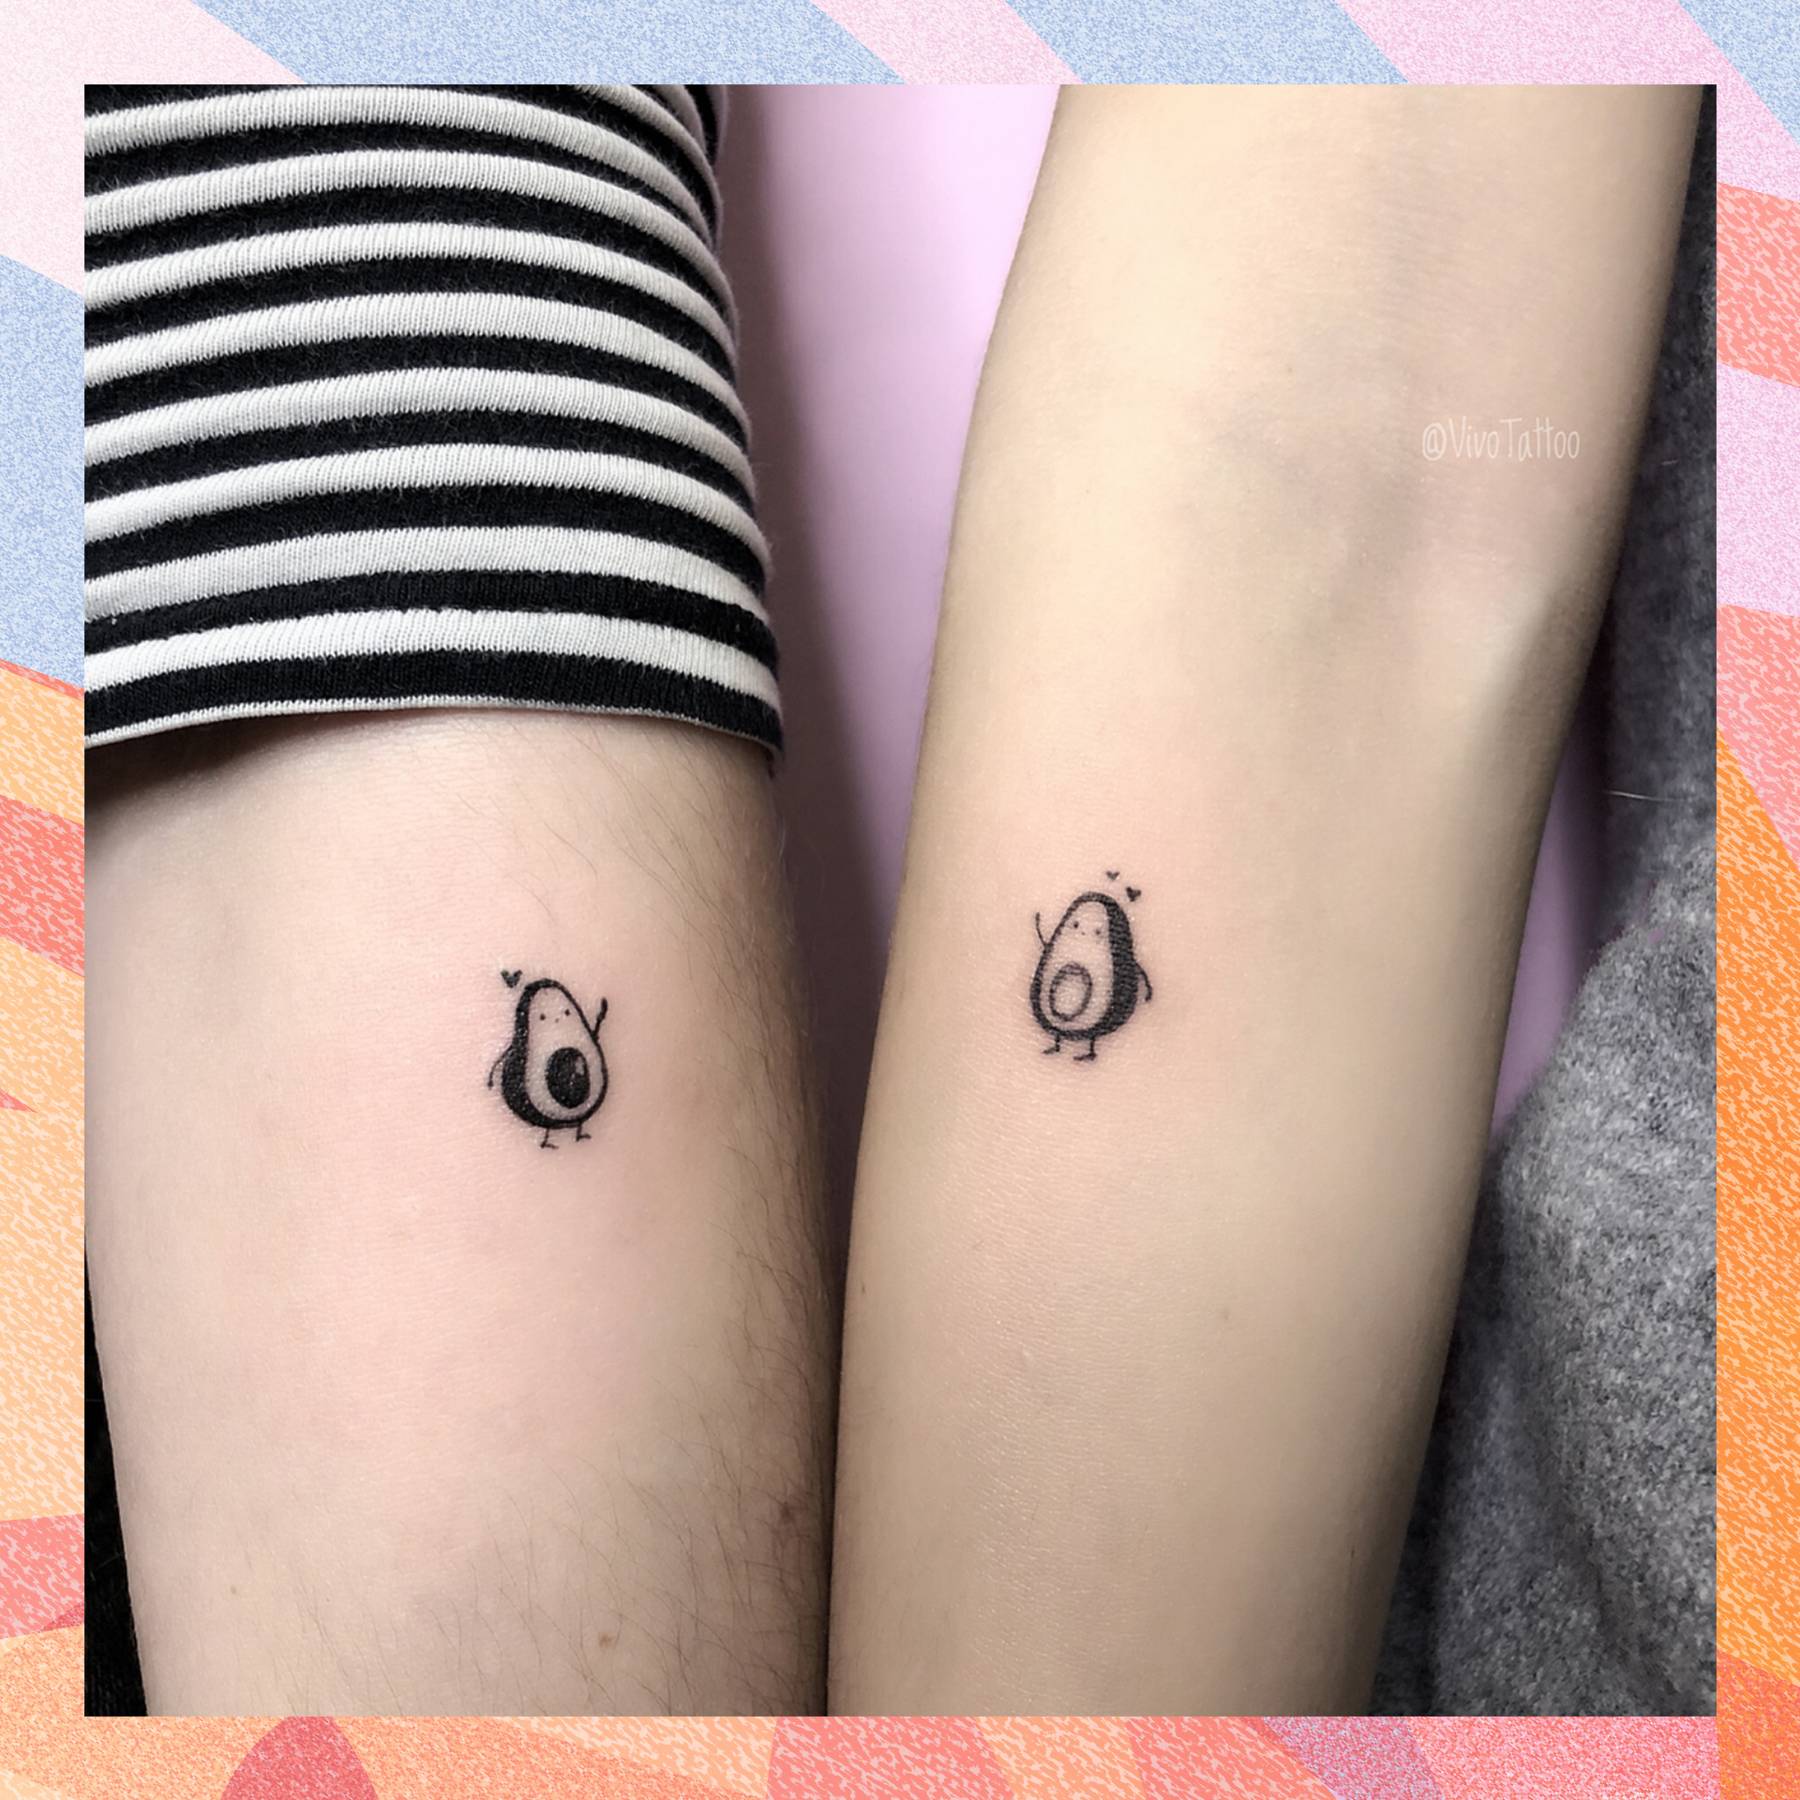 Best friend connecting tattoos